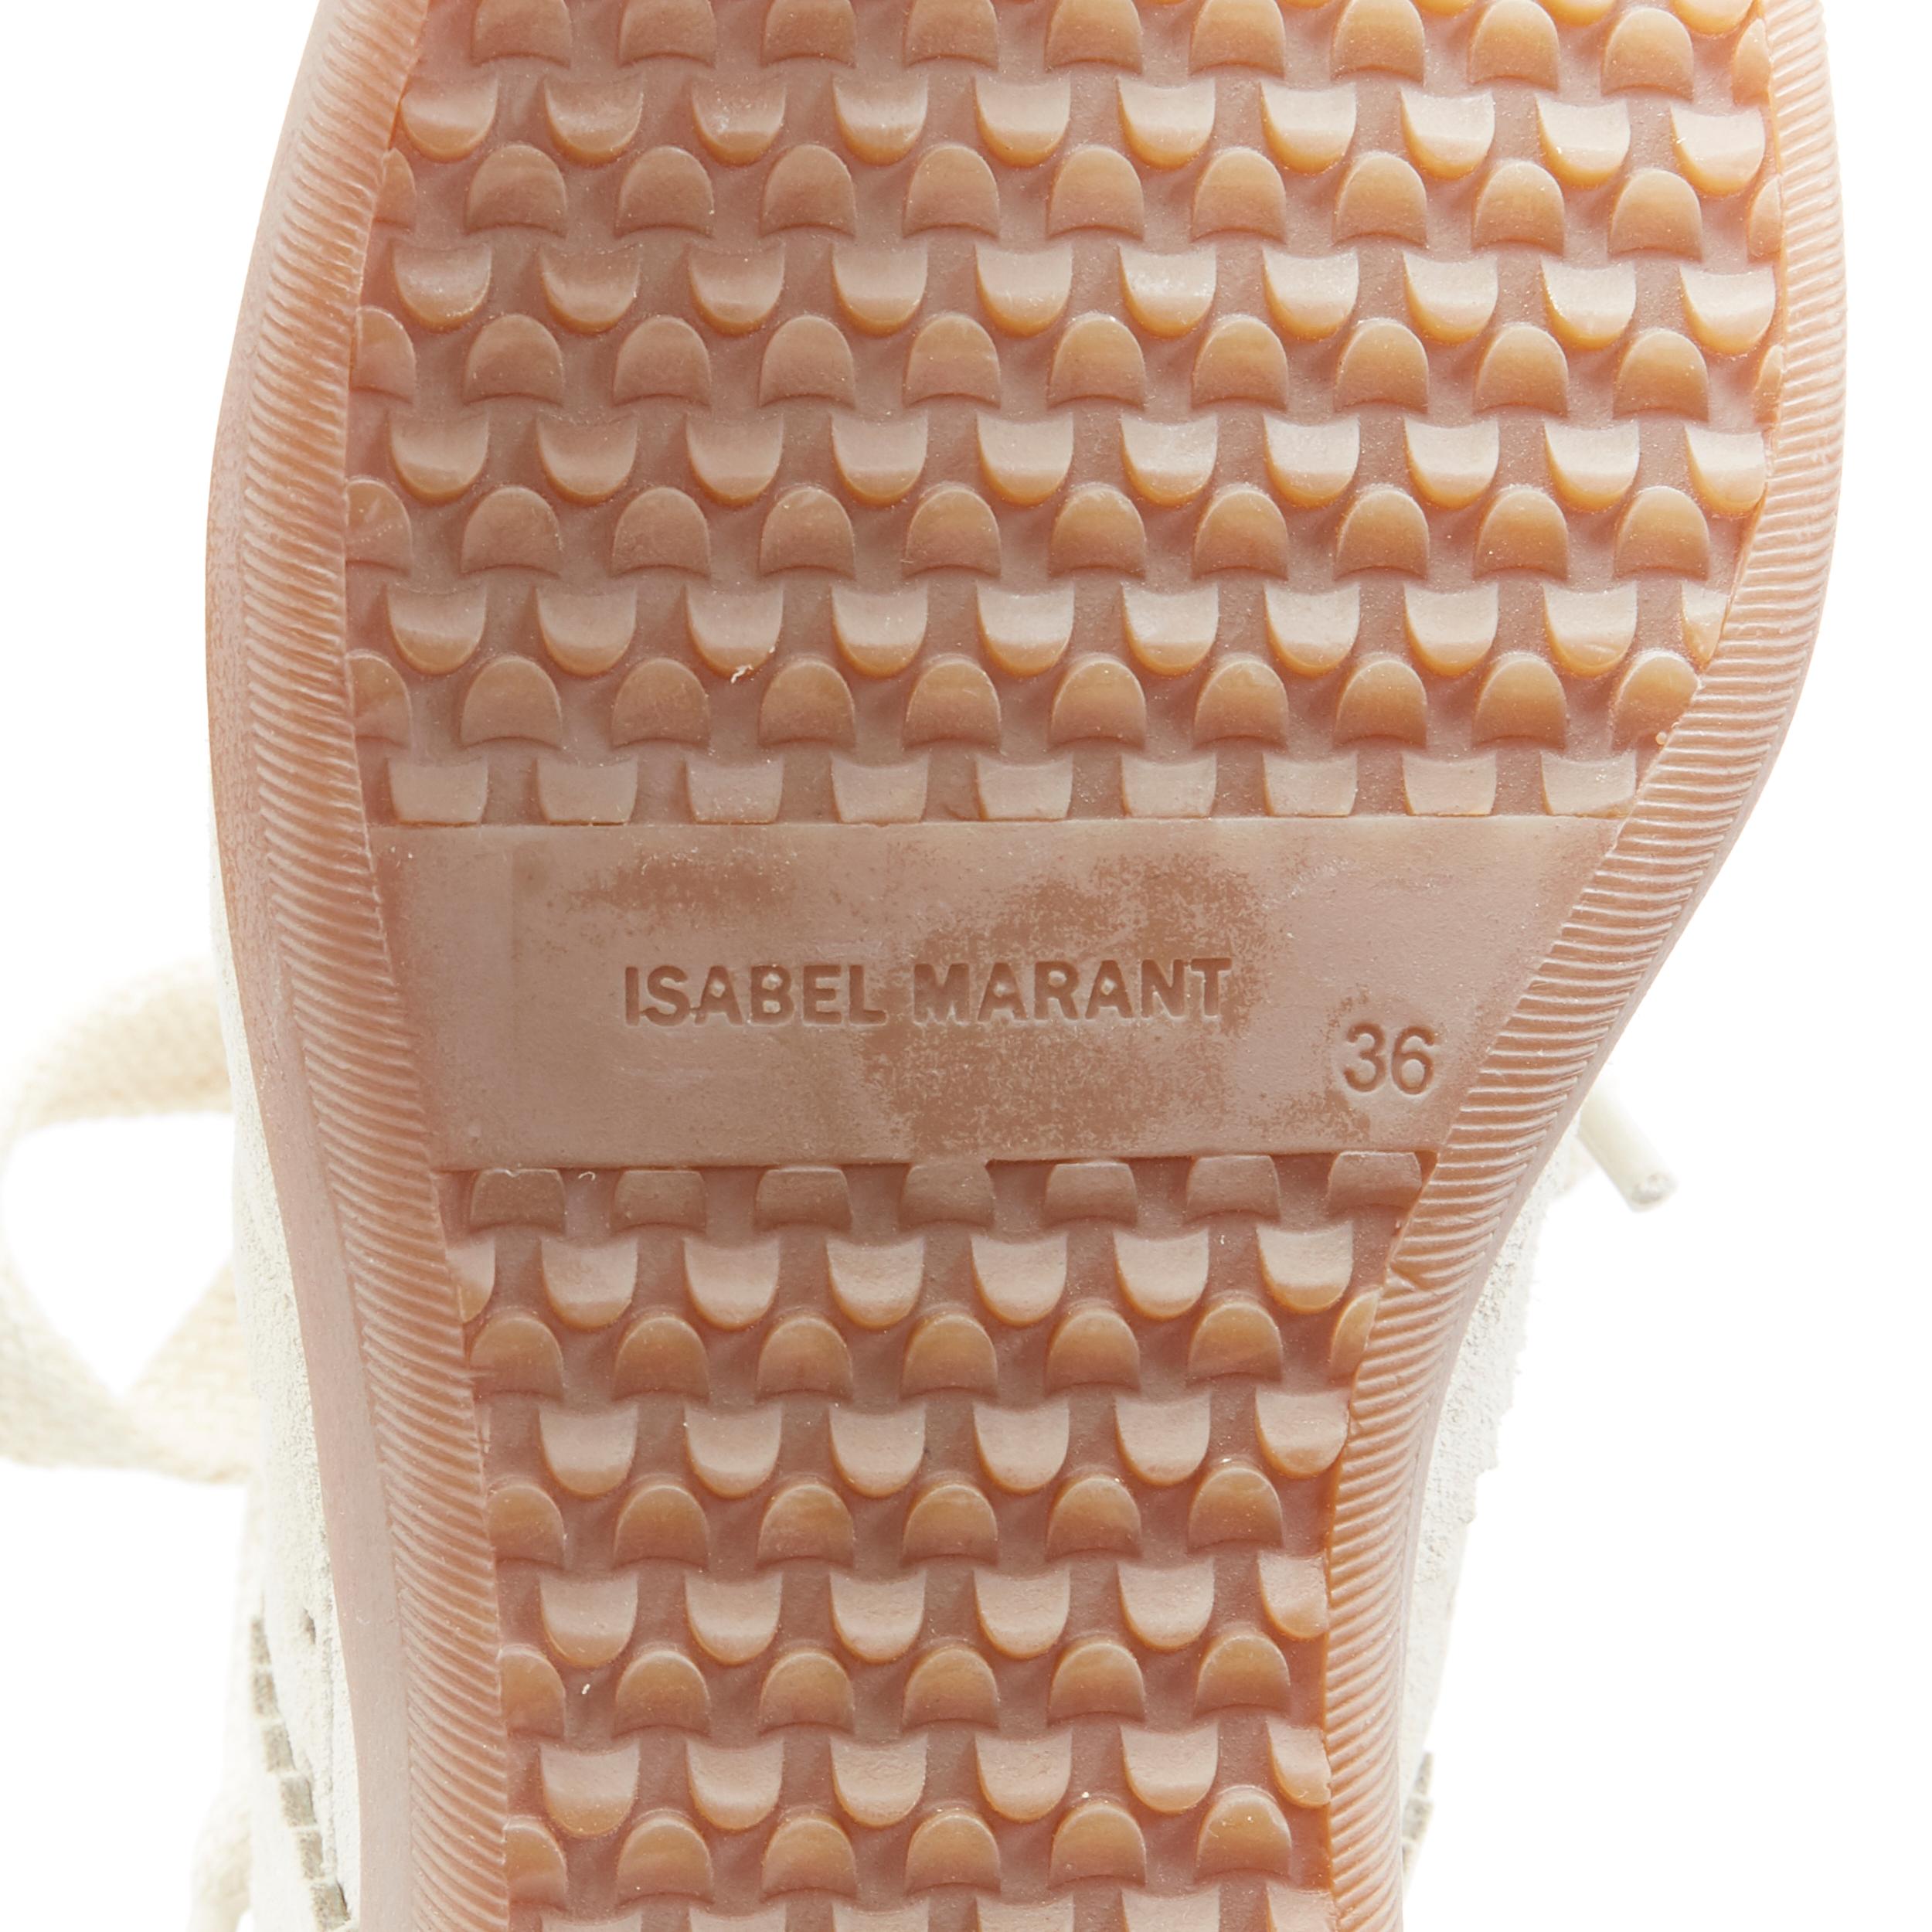 new ISABEL MARANT Bobby Chalk beige suede lace up concealed wedge sneaker EU36 6